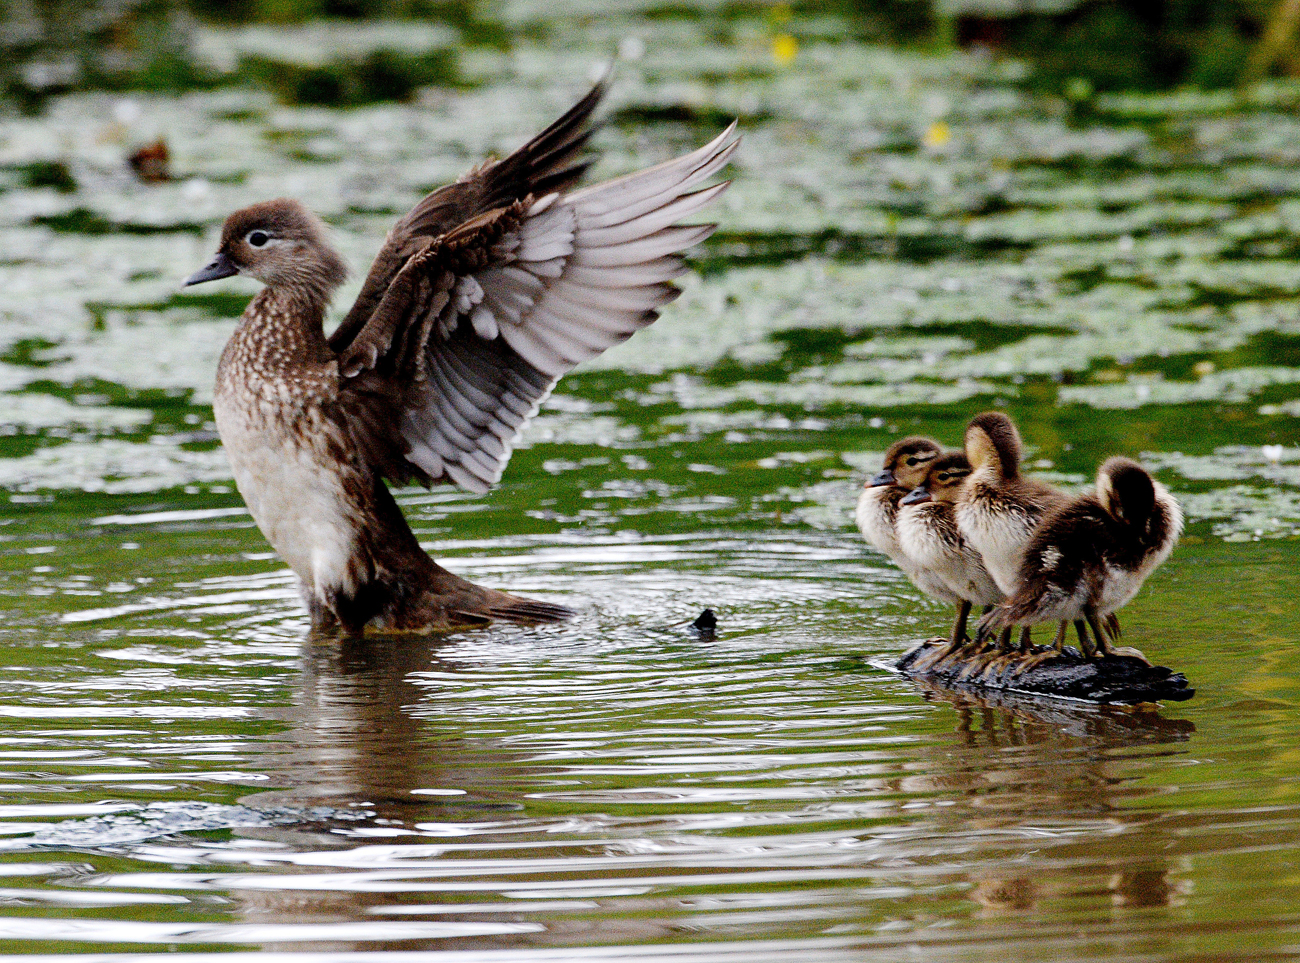 A Mandarin duck with ducklings on a pond in Vladivostok